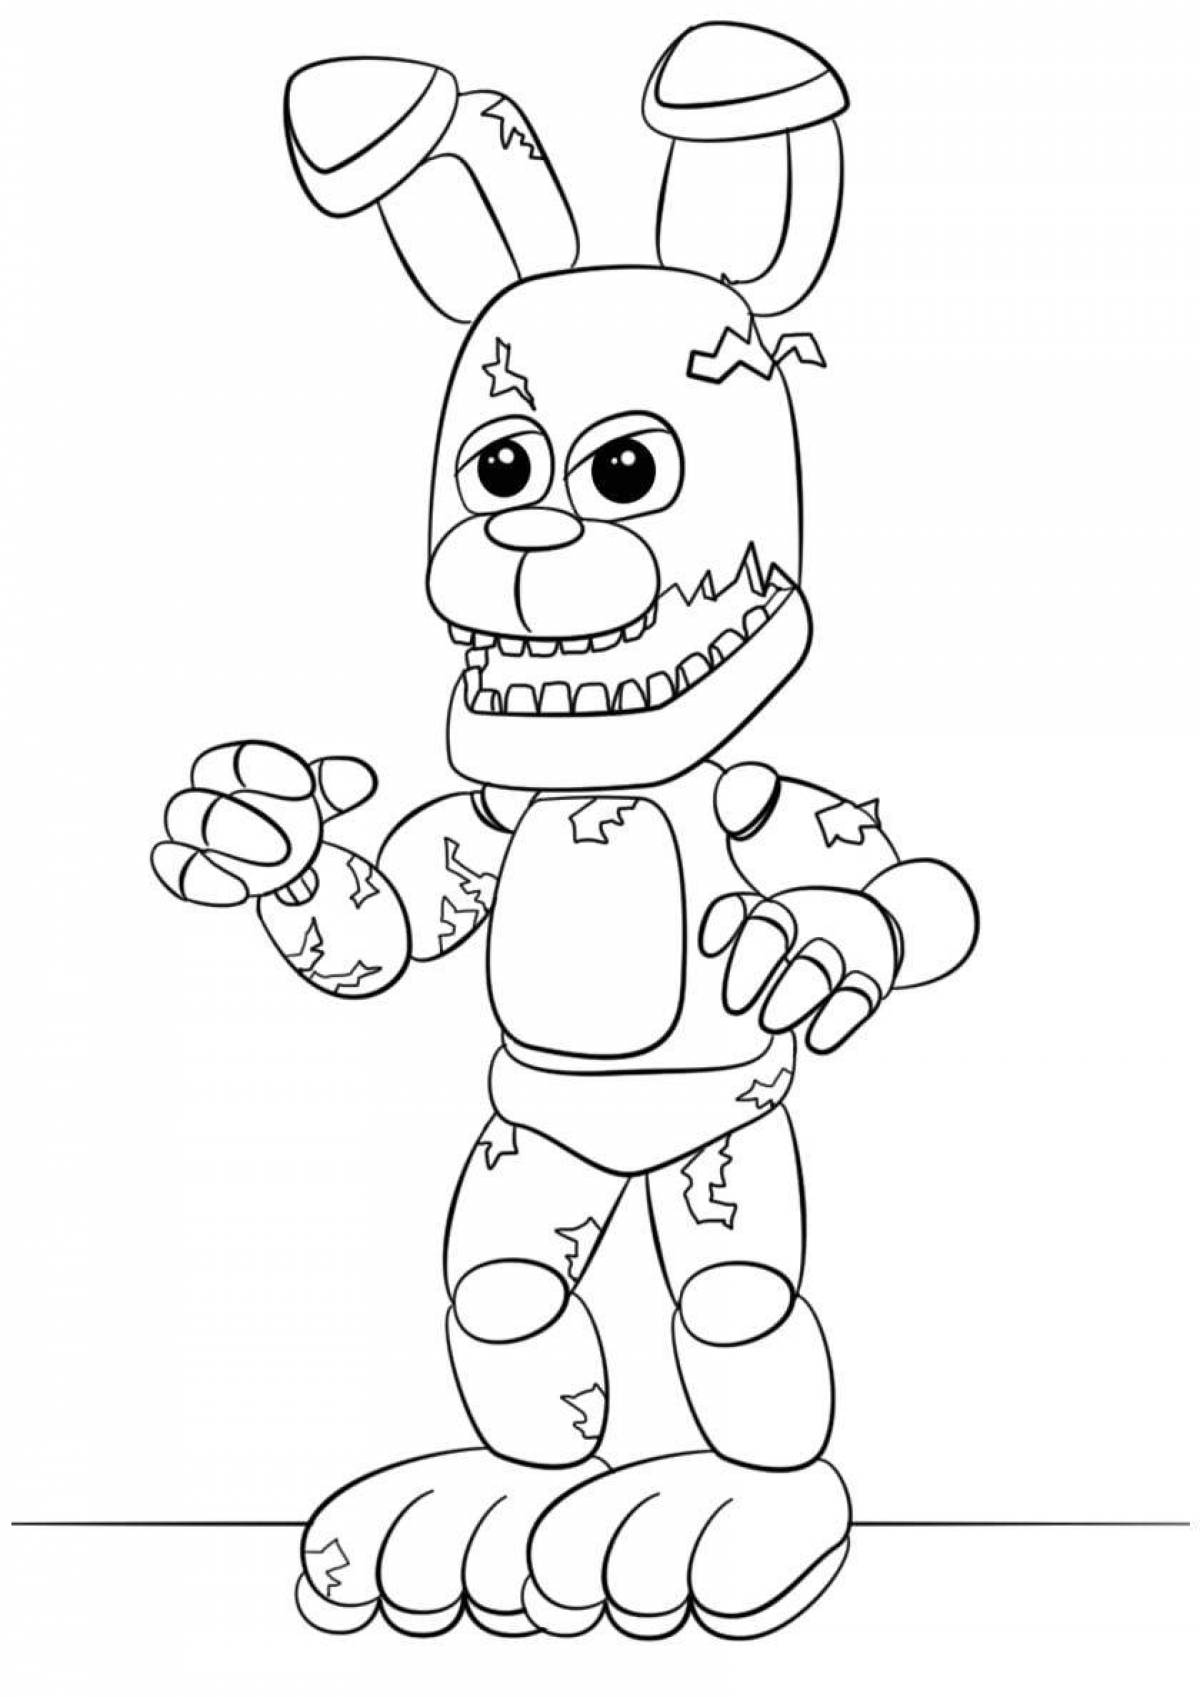 Creepy bonnified coloring page